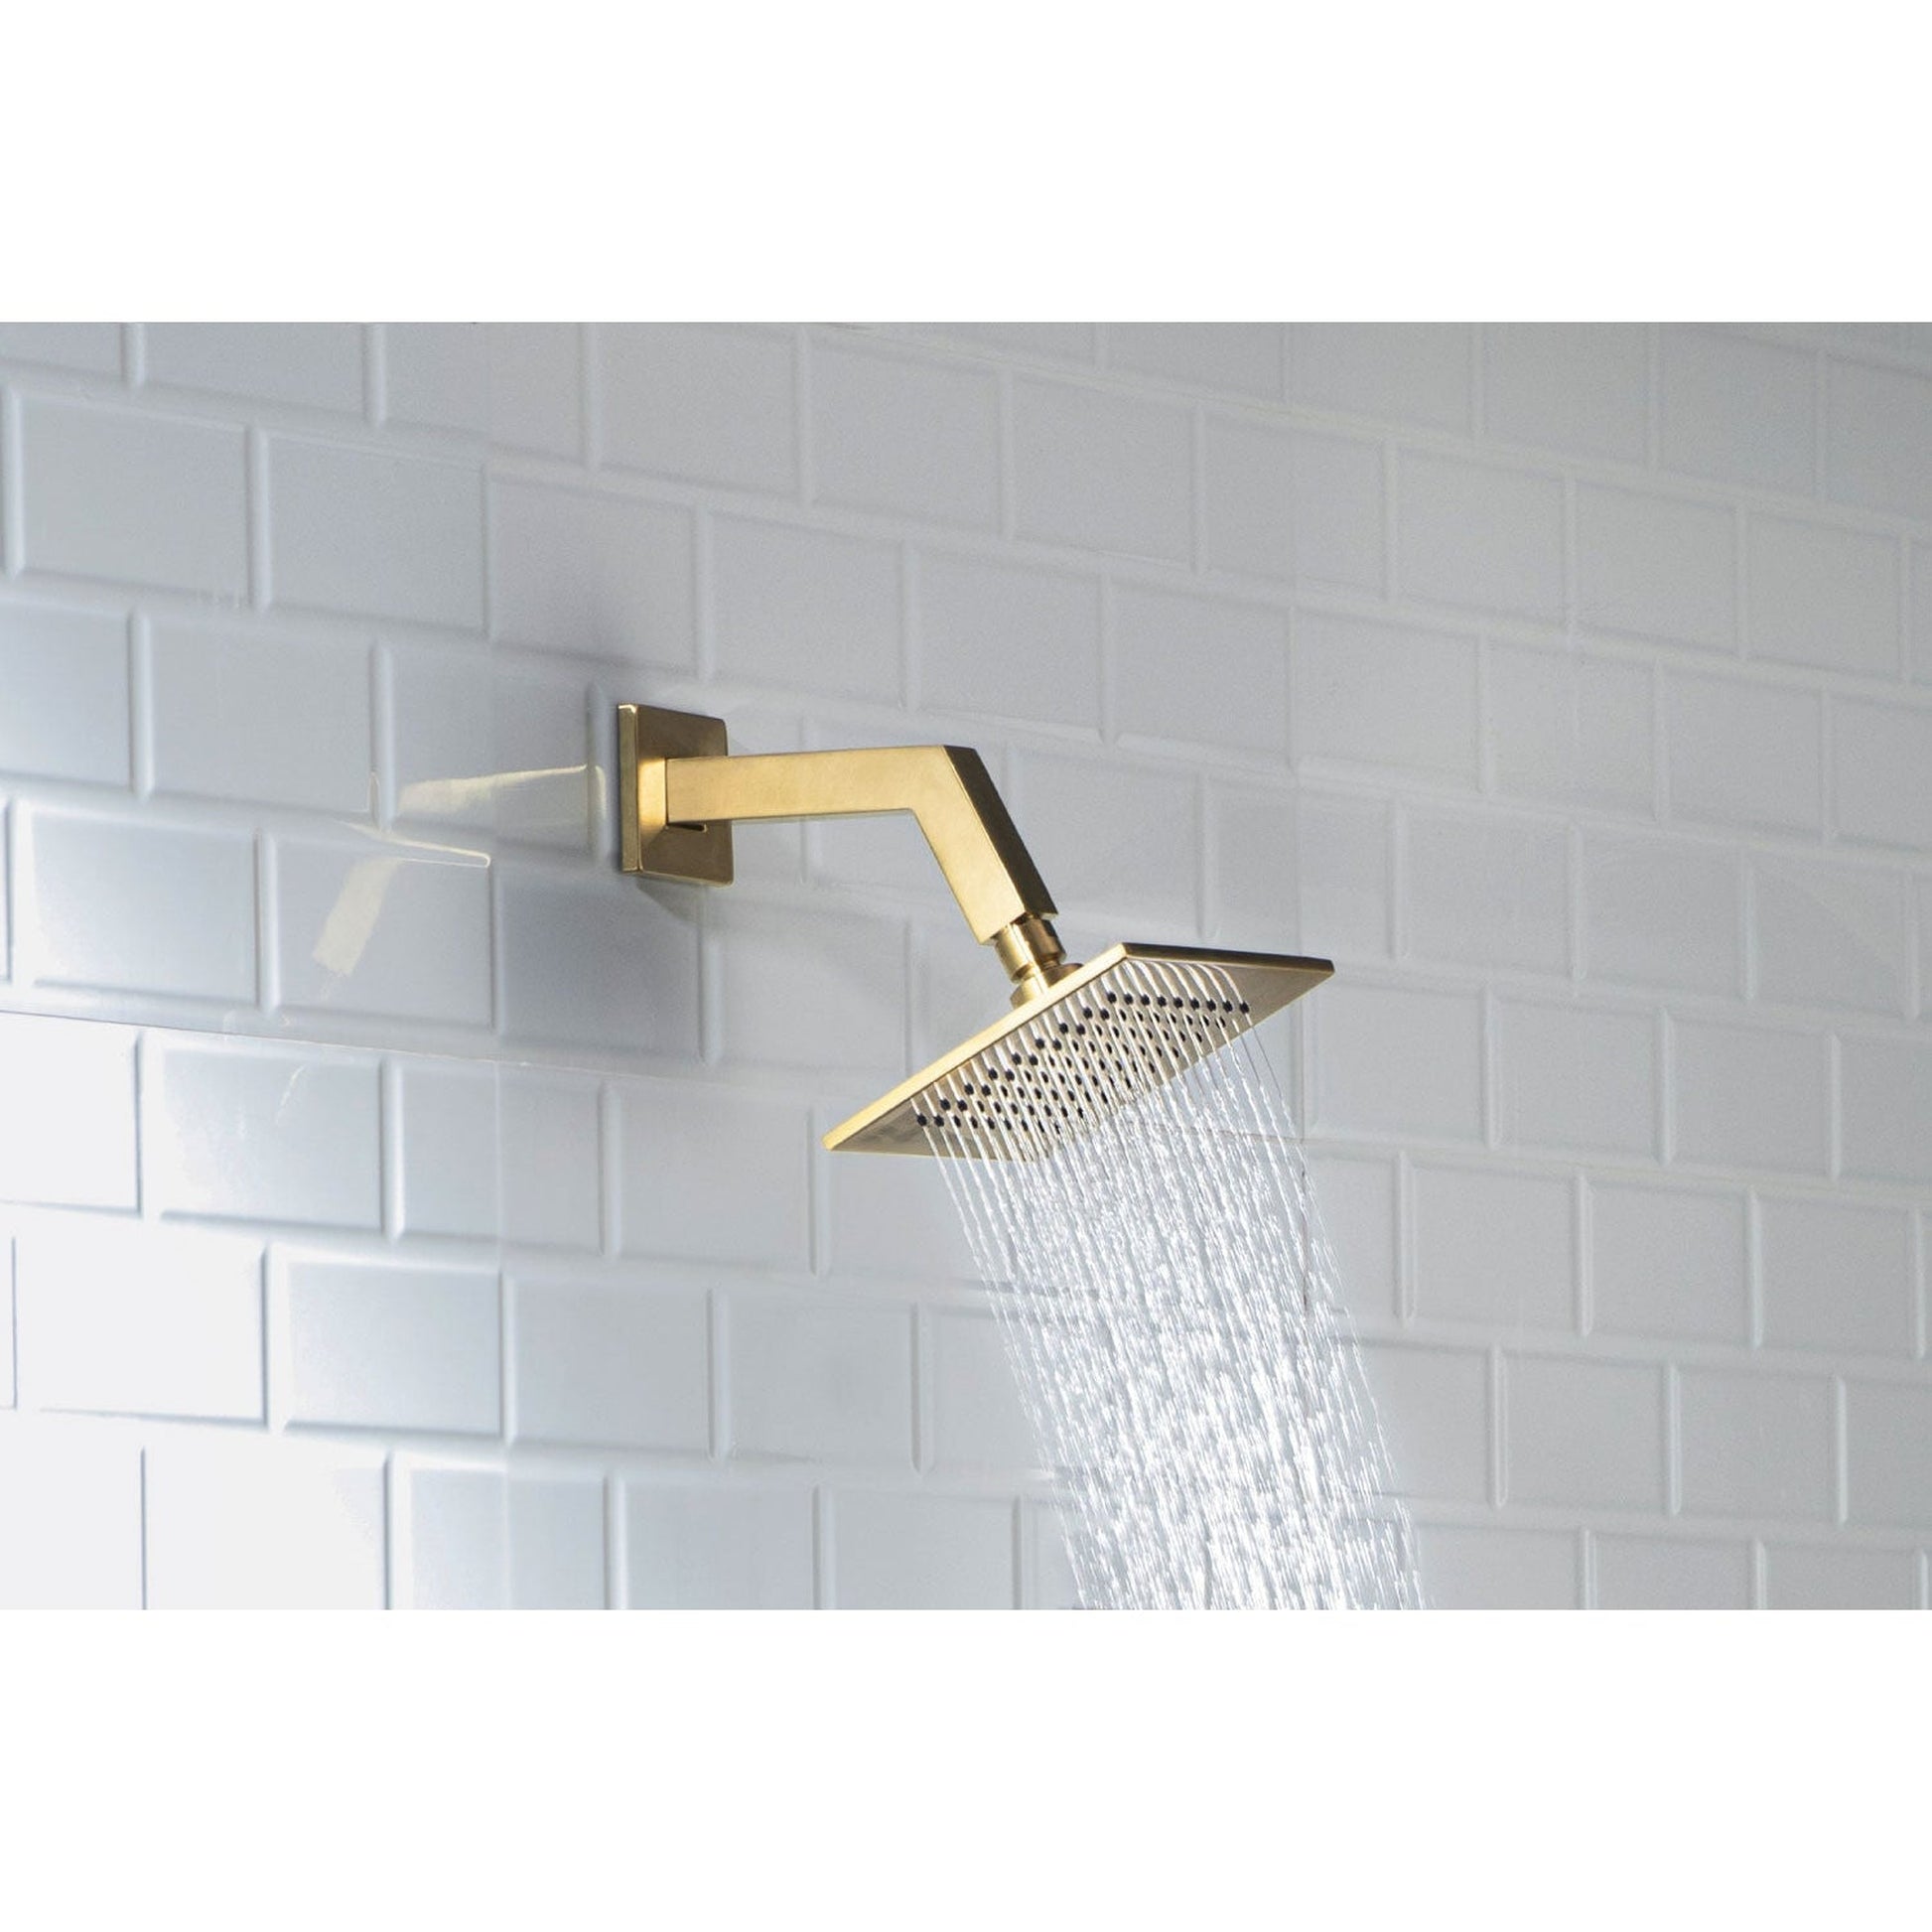 Isenberg Universal Fixtures 6" Single Function Square Chrome Solid Brass Rain Shower Head With 8" Wall Mounted Shower Arm